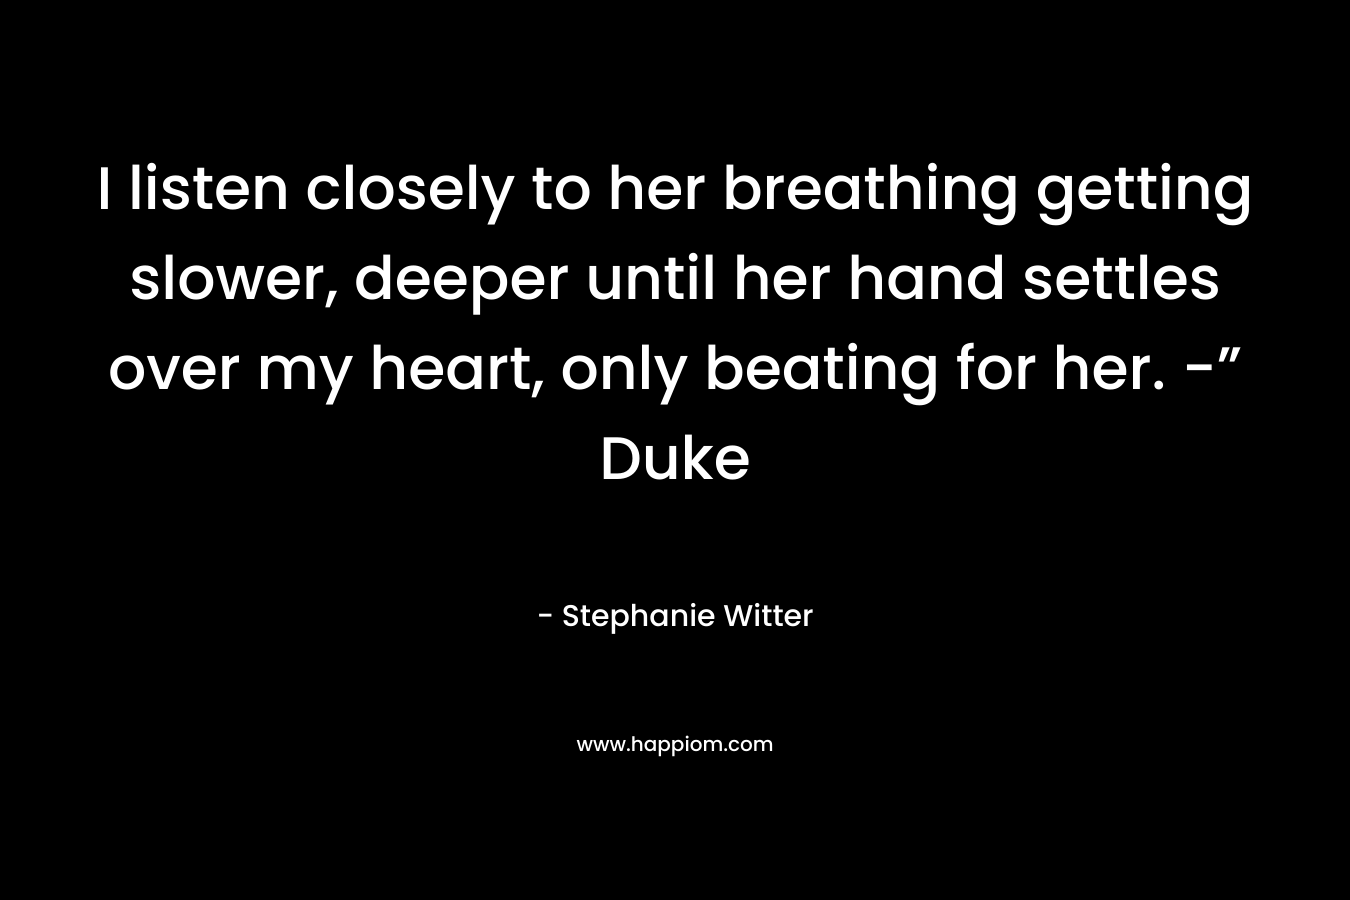 I listen closely to her breathing getting slower, deeper until her hand settles over my heart, only beating for her. -” Duke